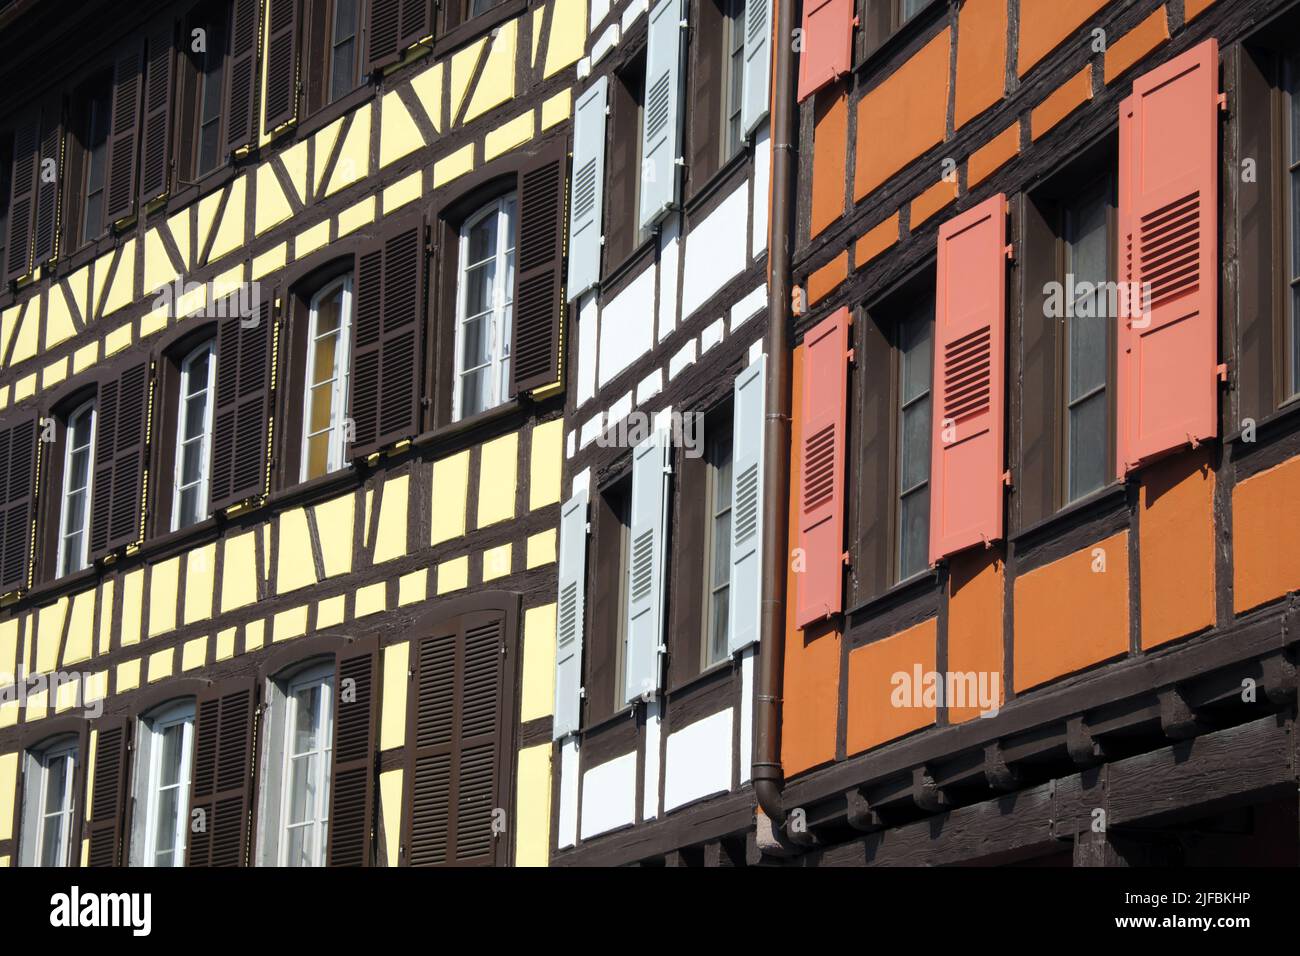 France, Bas Rhin, Strasbourg, old town listed as World Heritage by UNESCO, Petite France, half-timbered houses Stock Photo